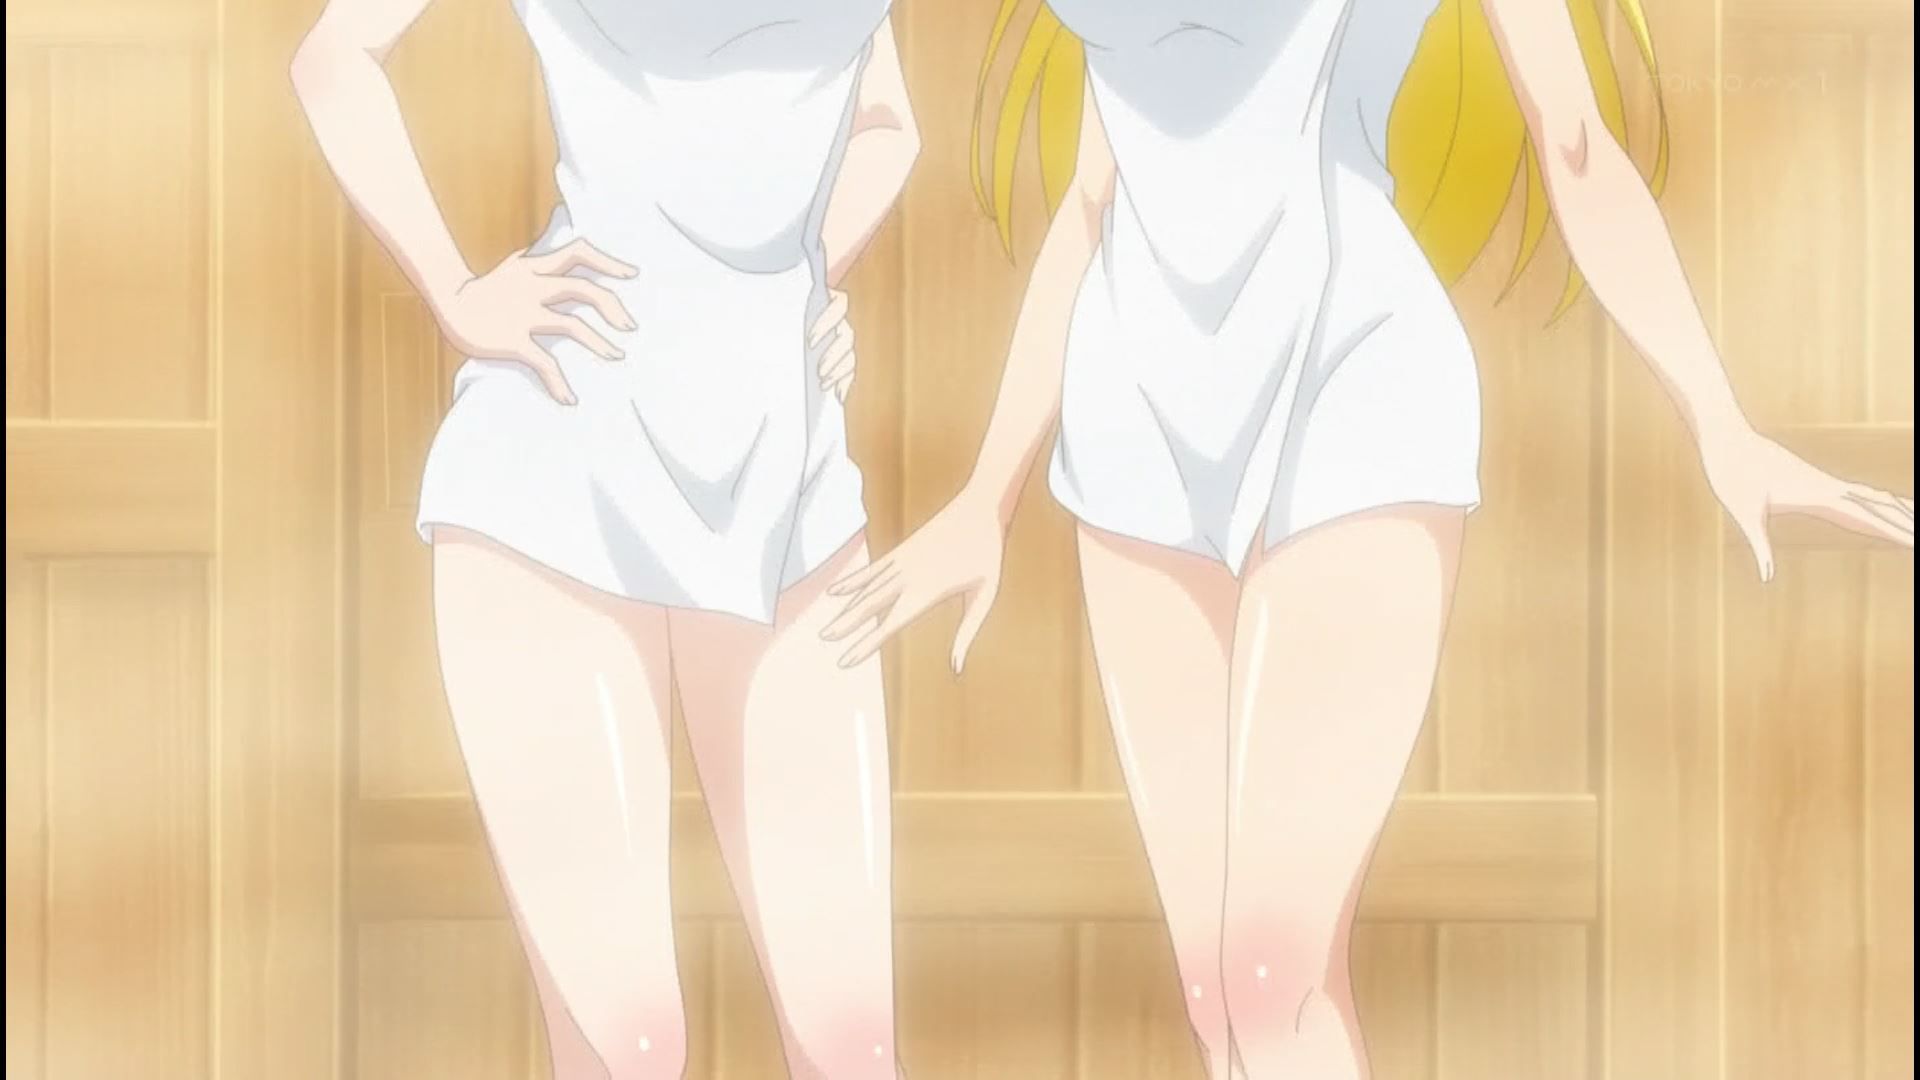 In episode 4 of the anime "True Companion", there is an erotic scene where you enter the sauna naked with an erotic boob girl! 11